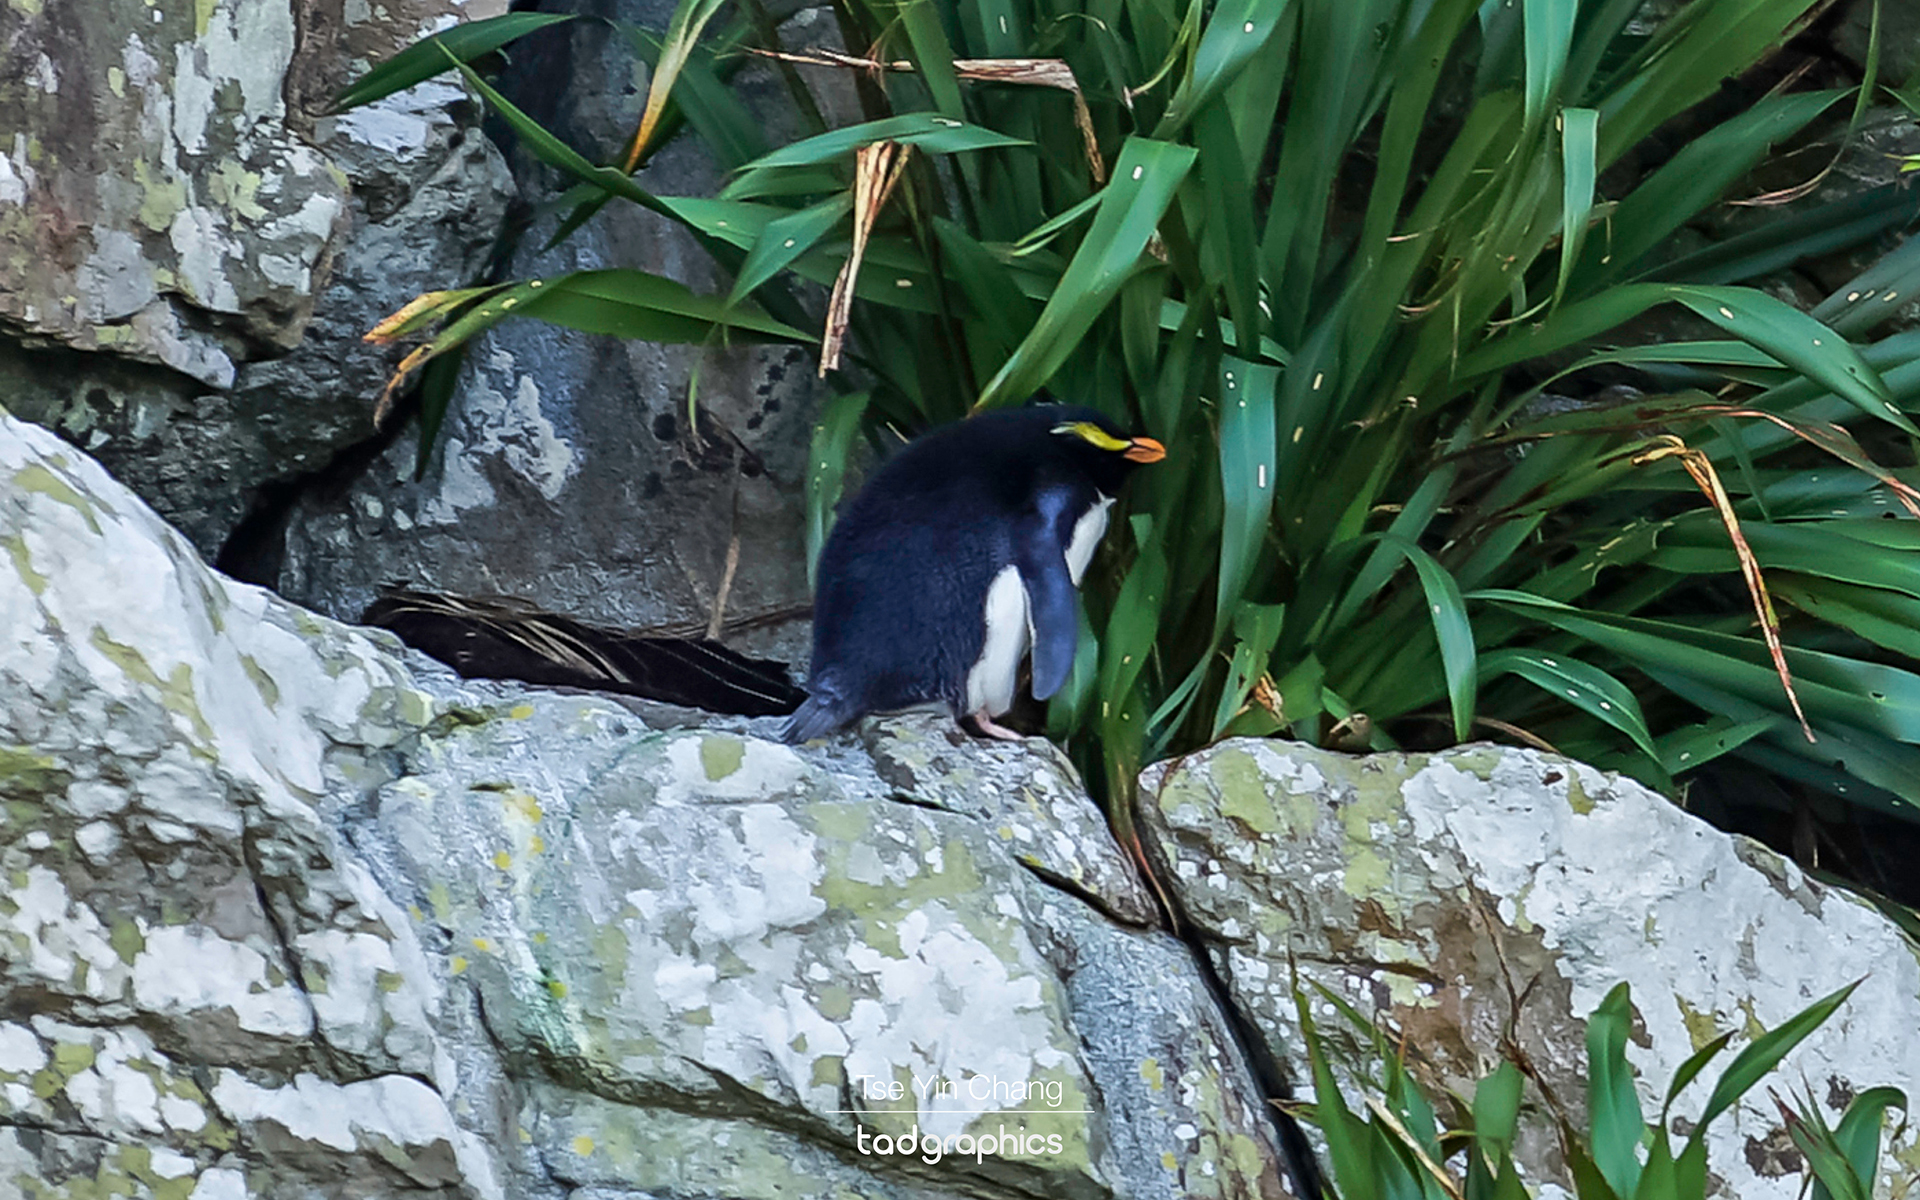 We were lucky to catch a glimpse of the rare Fiordland Crested Penguin